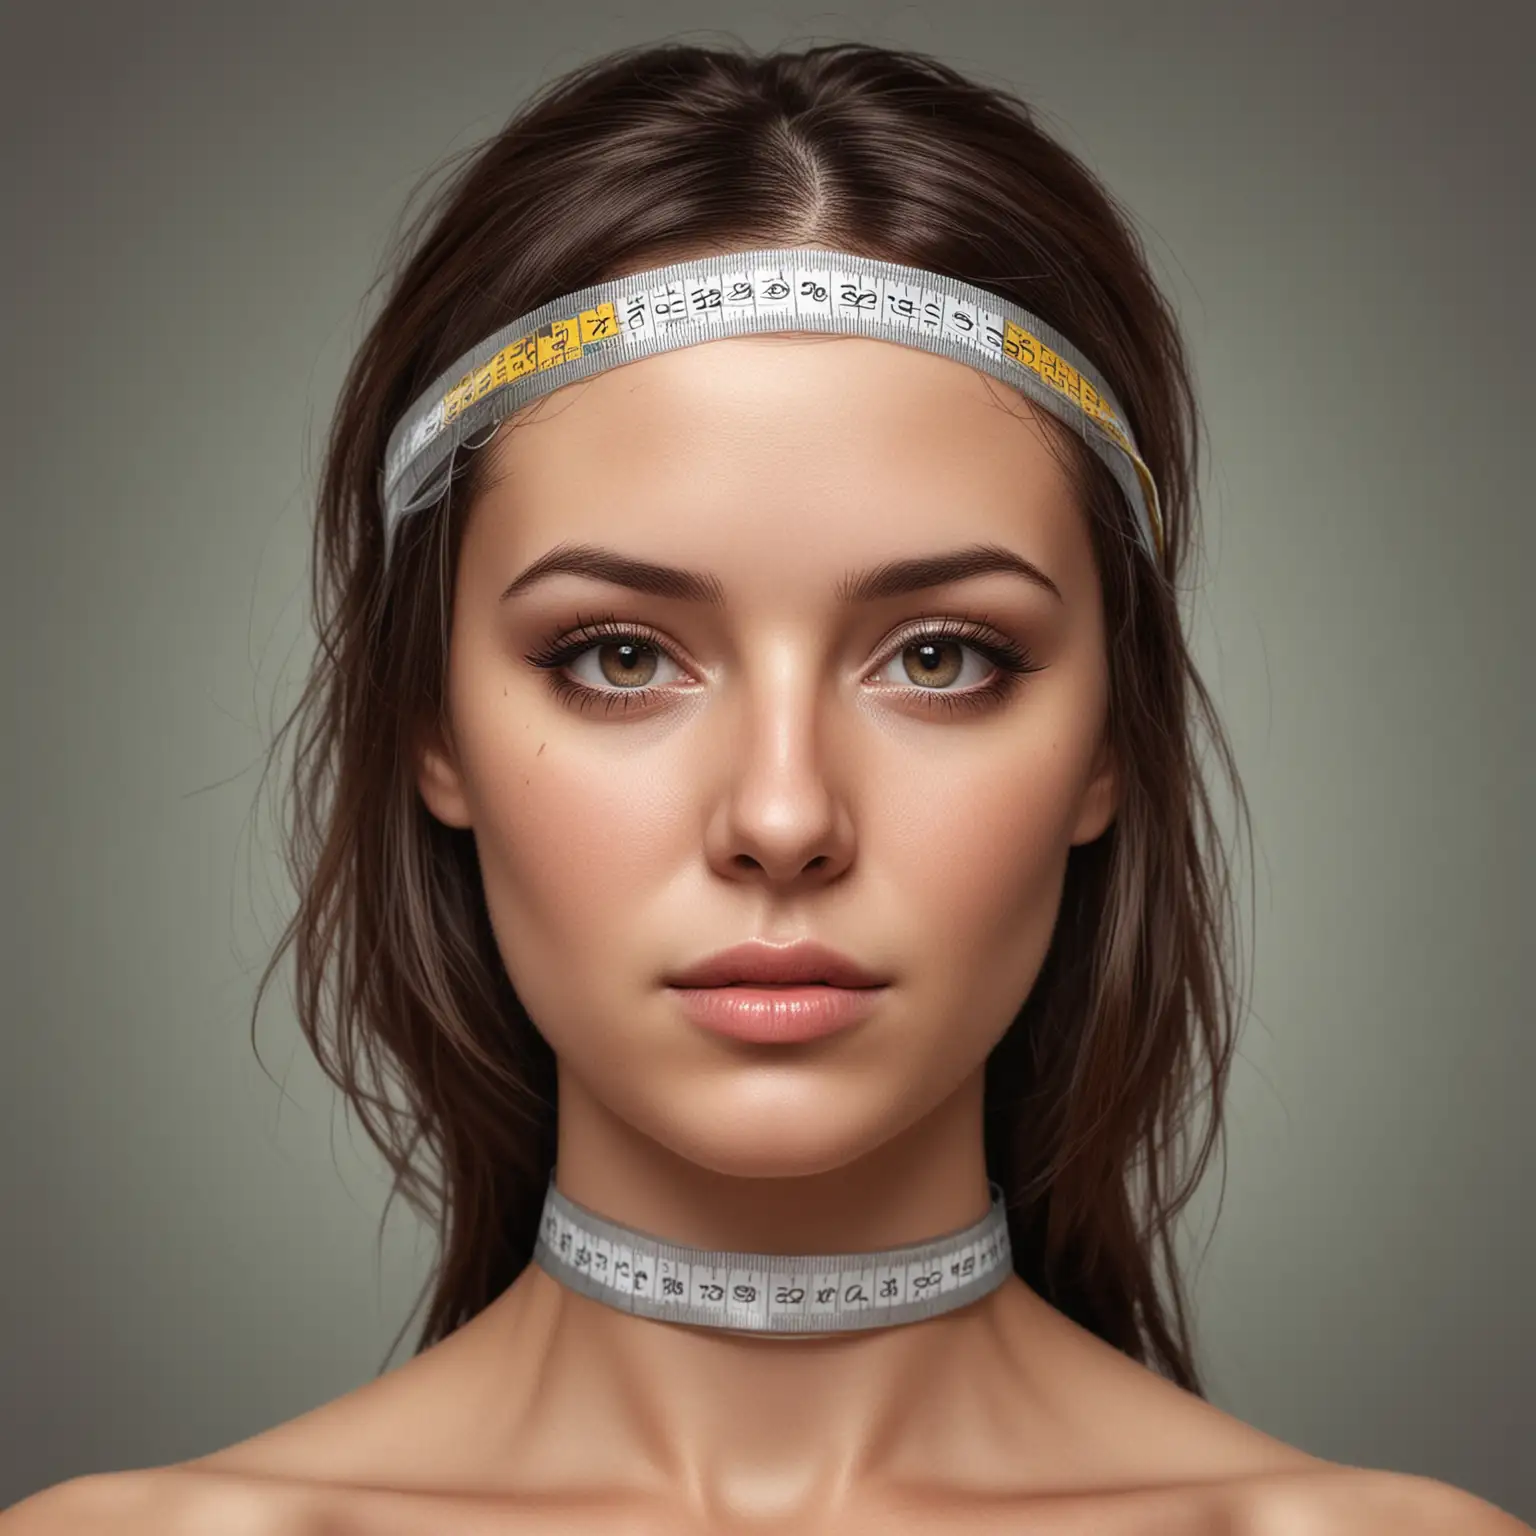 Realistic Womans Head Wrapped in Measuring Tape